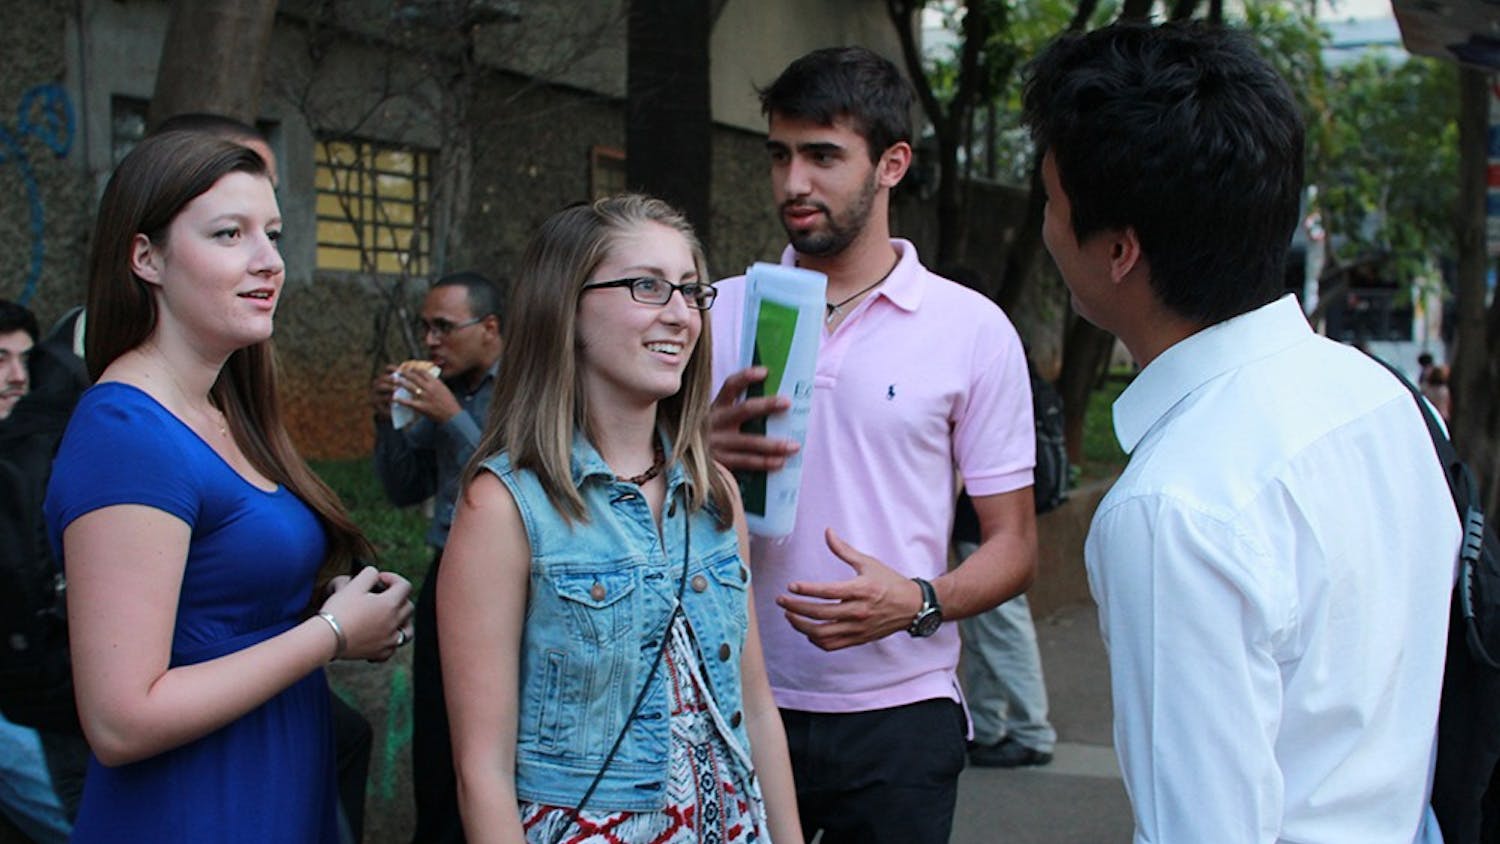 Jules Daugherty, an IU student studying abroad in Brazil, talks with Lucas Saito Valeriano on Wednesday night at their university in São Paulo. Daugherty says she has struggled with handling the degree of sexism even within platonic friendships here in Brazil.